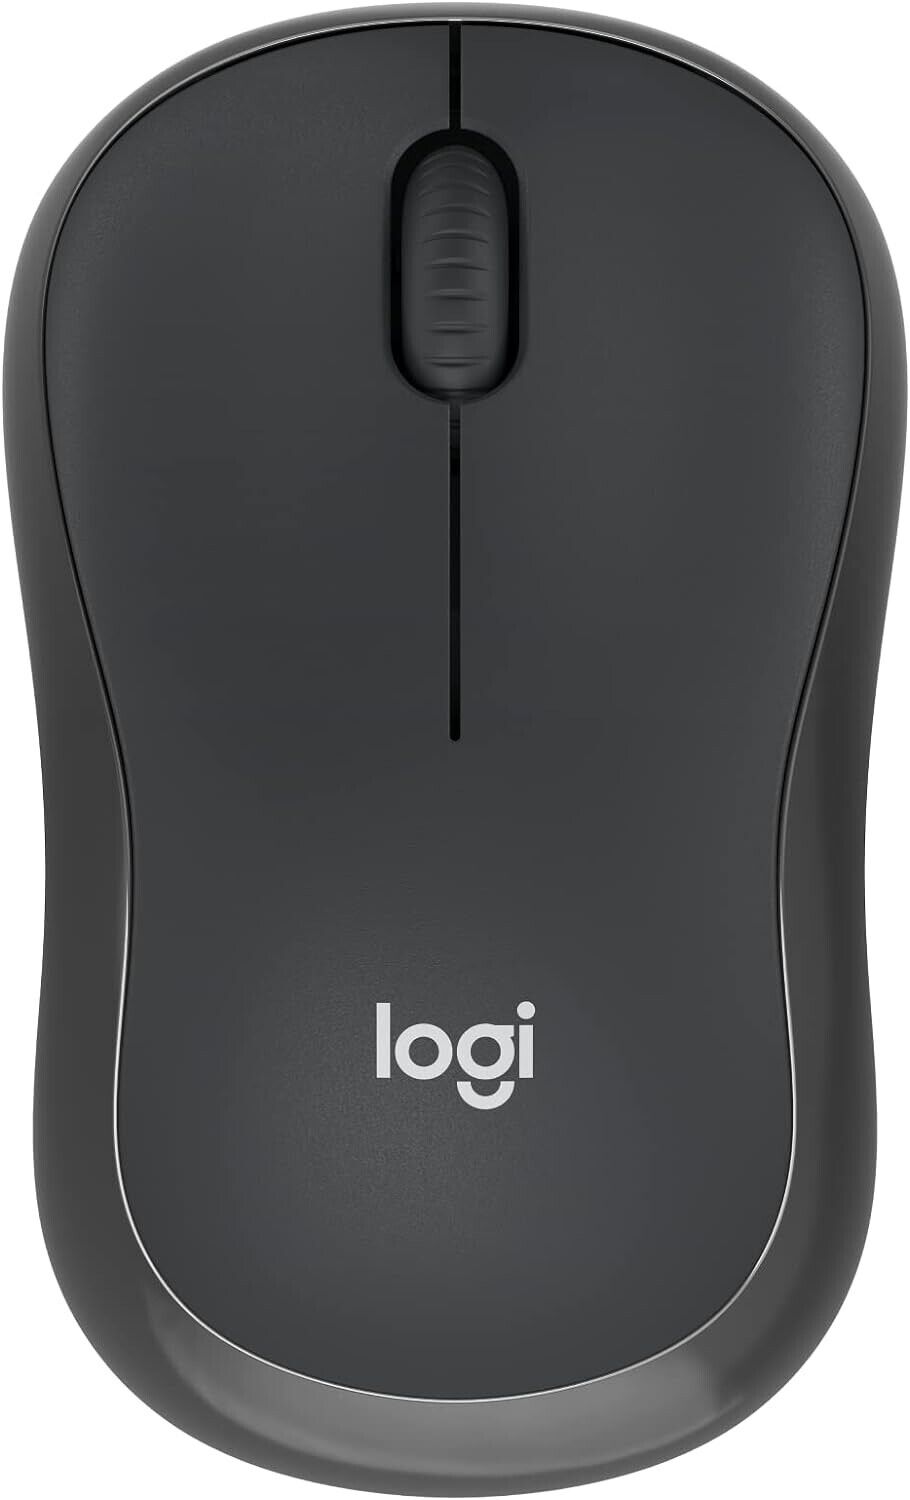 Logitech Bluetooth Wireless Mouse M240 Silent (BRAND NEW AND FACTORY SEALED)